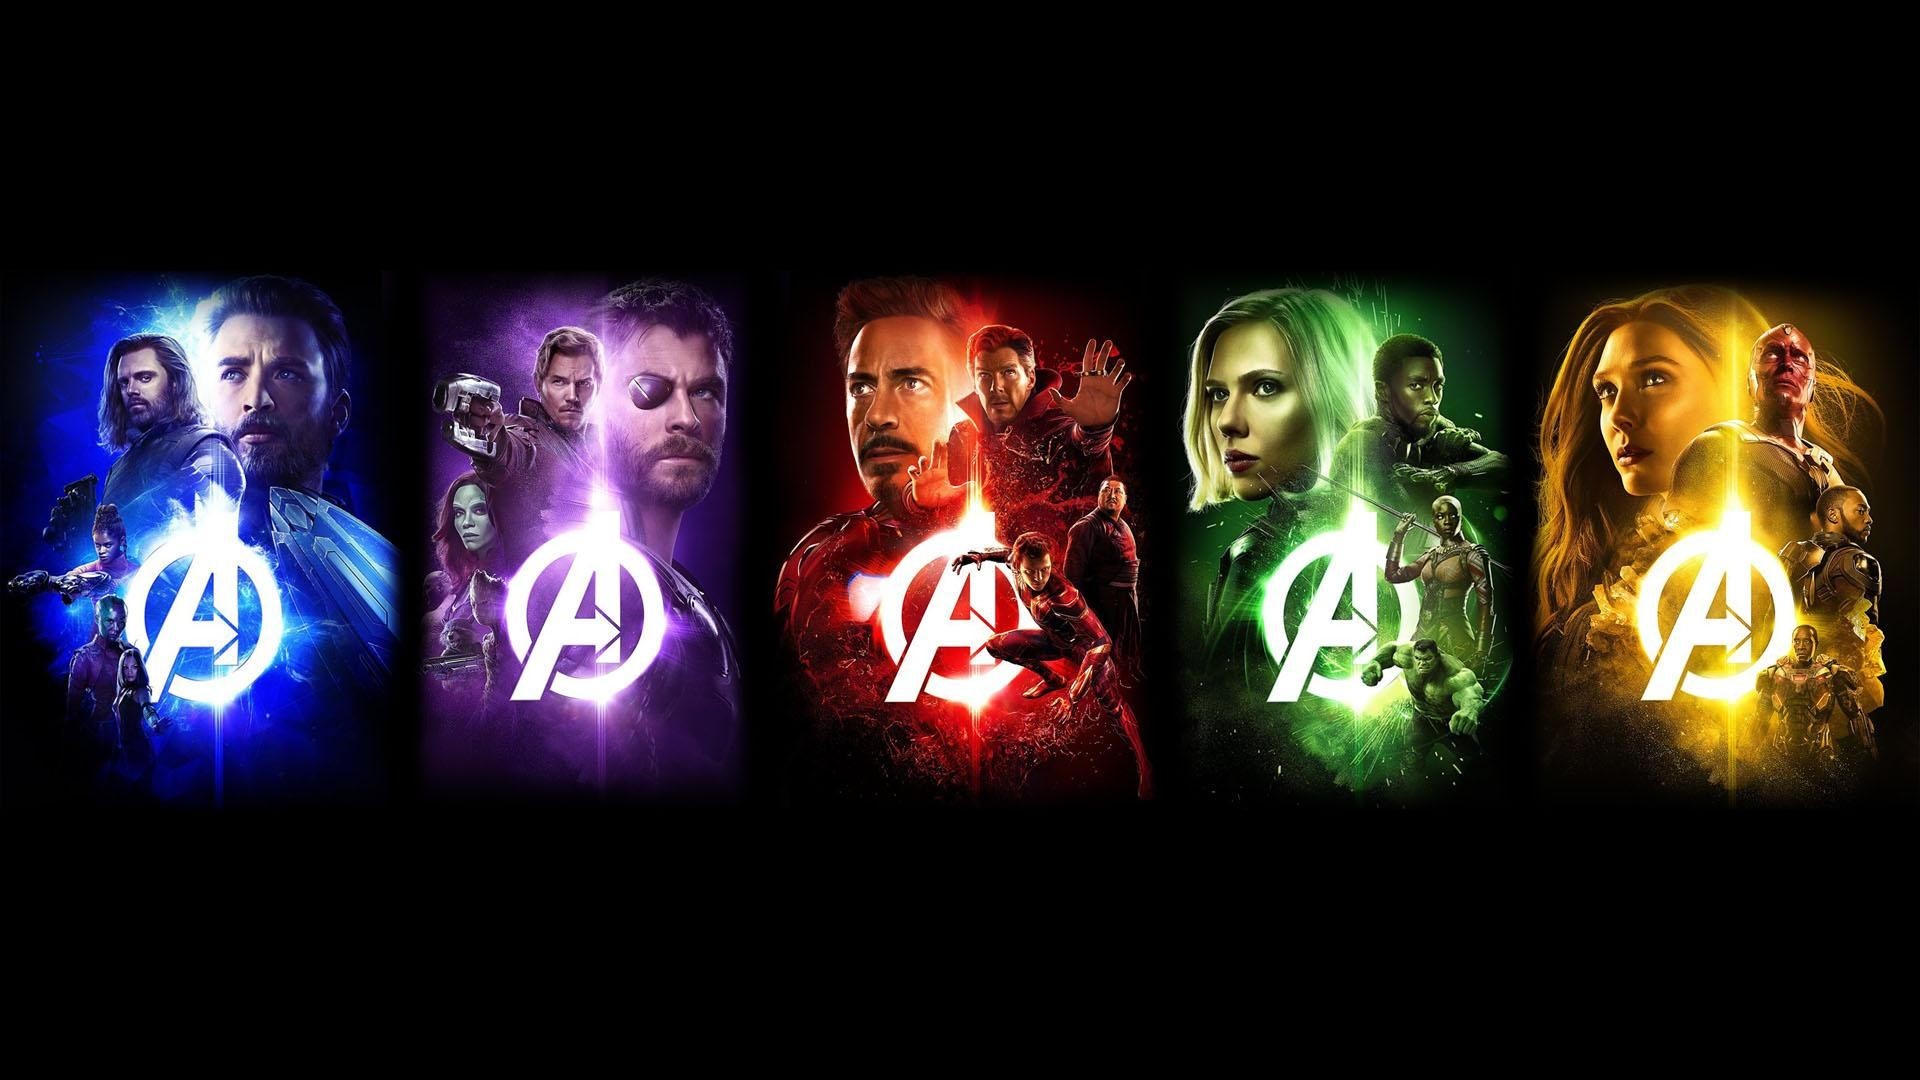 Avengers Infinity War Wallpaper HD with image resolution 1920x1080 pixel. You can use this wallpaper as background for your desktop Computer Screensavers, Android or iPhone smartphones